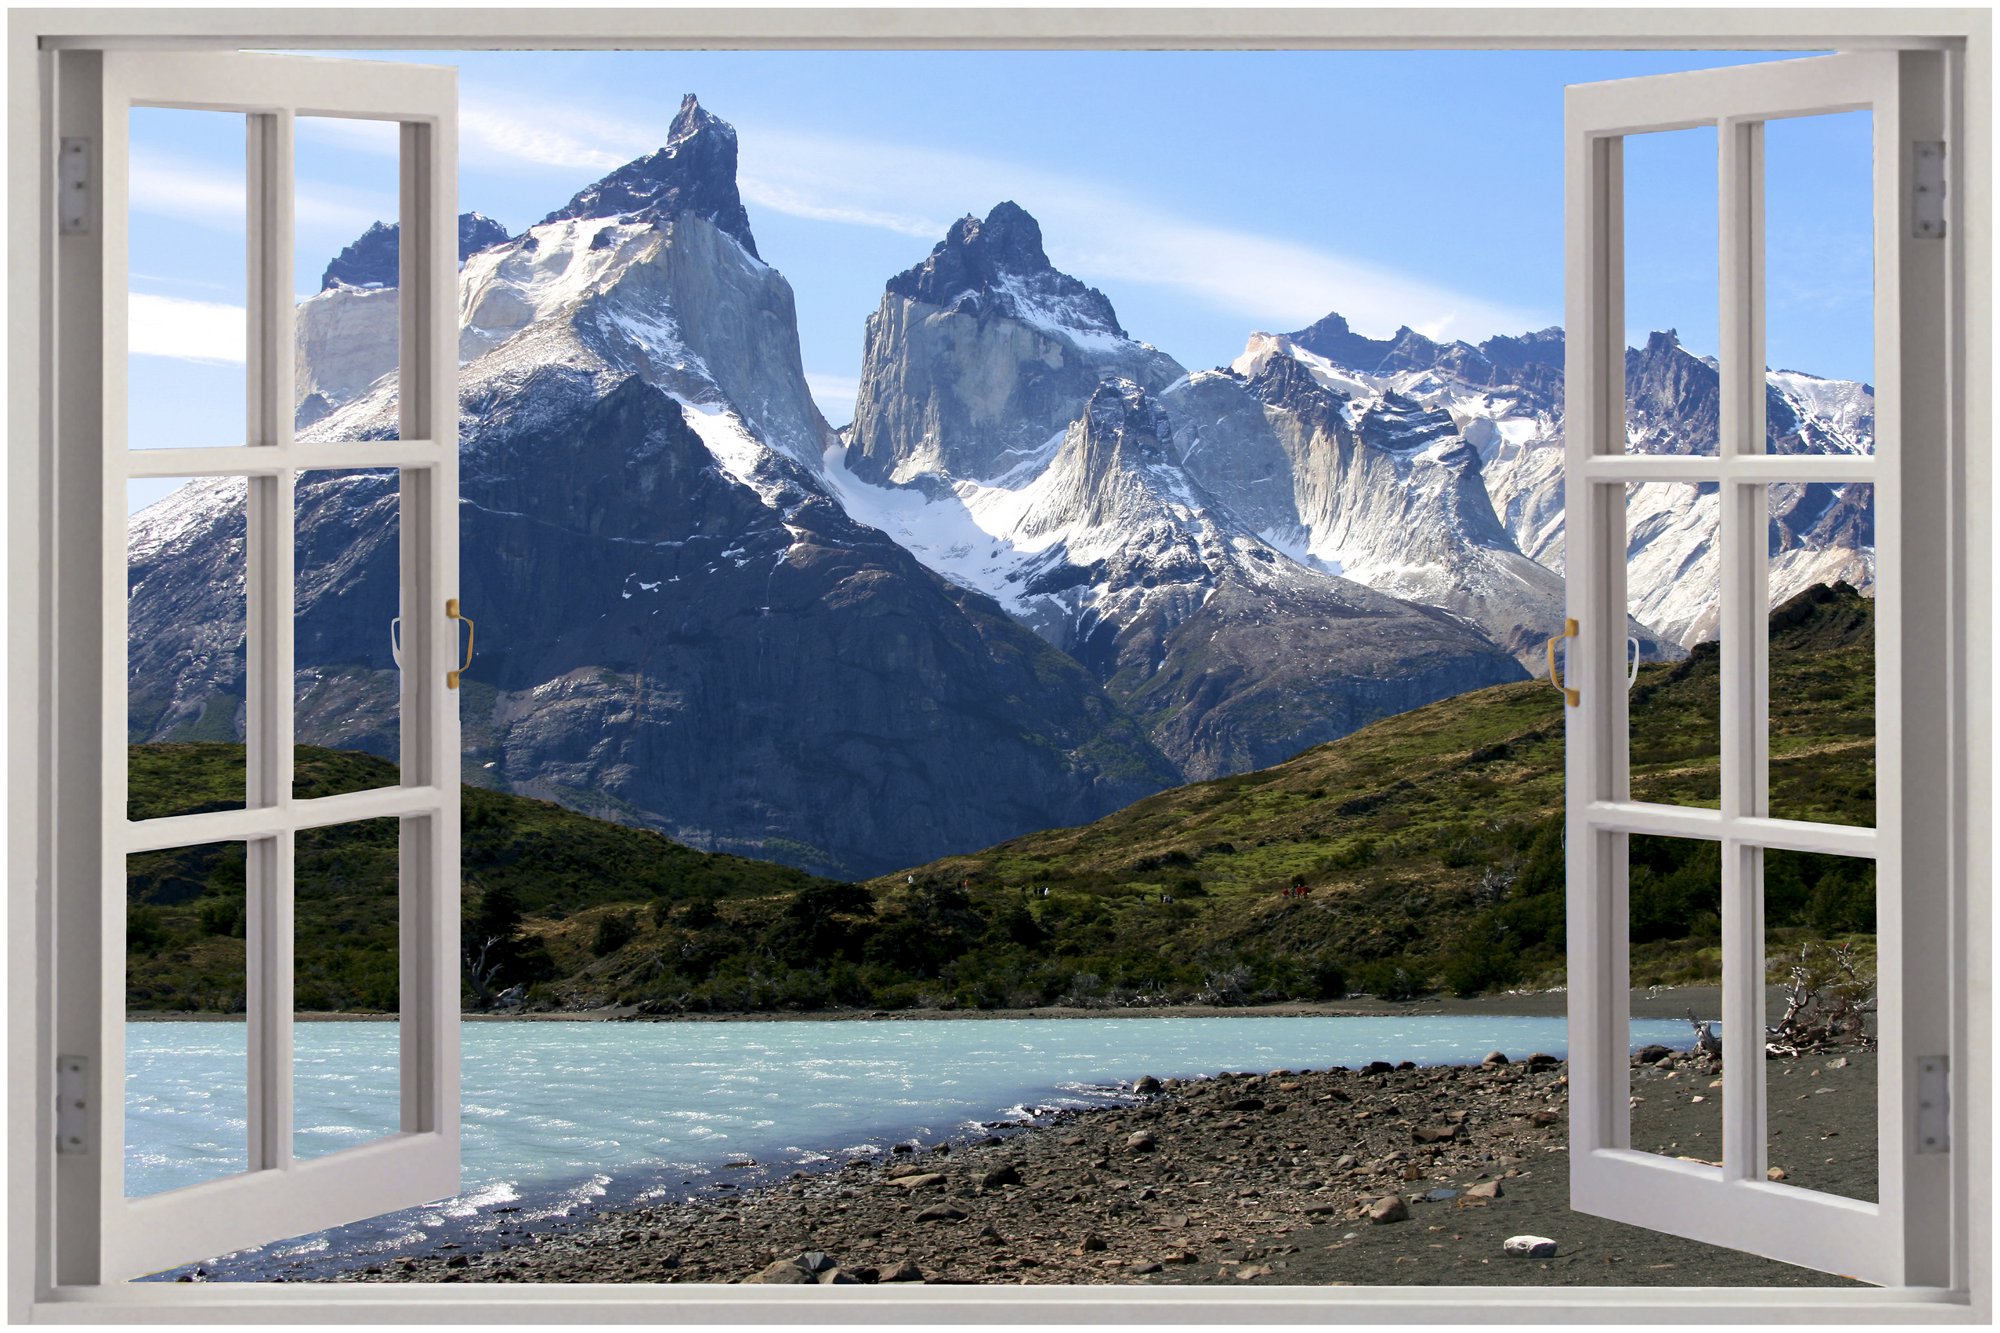 Huge 3d Window Exotic Mountain Wall Stickers Film Mural Art Decal